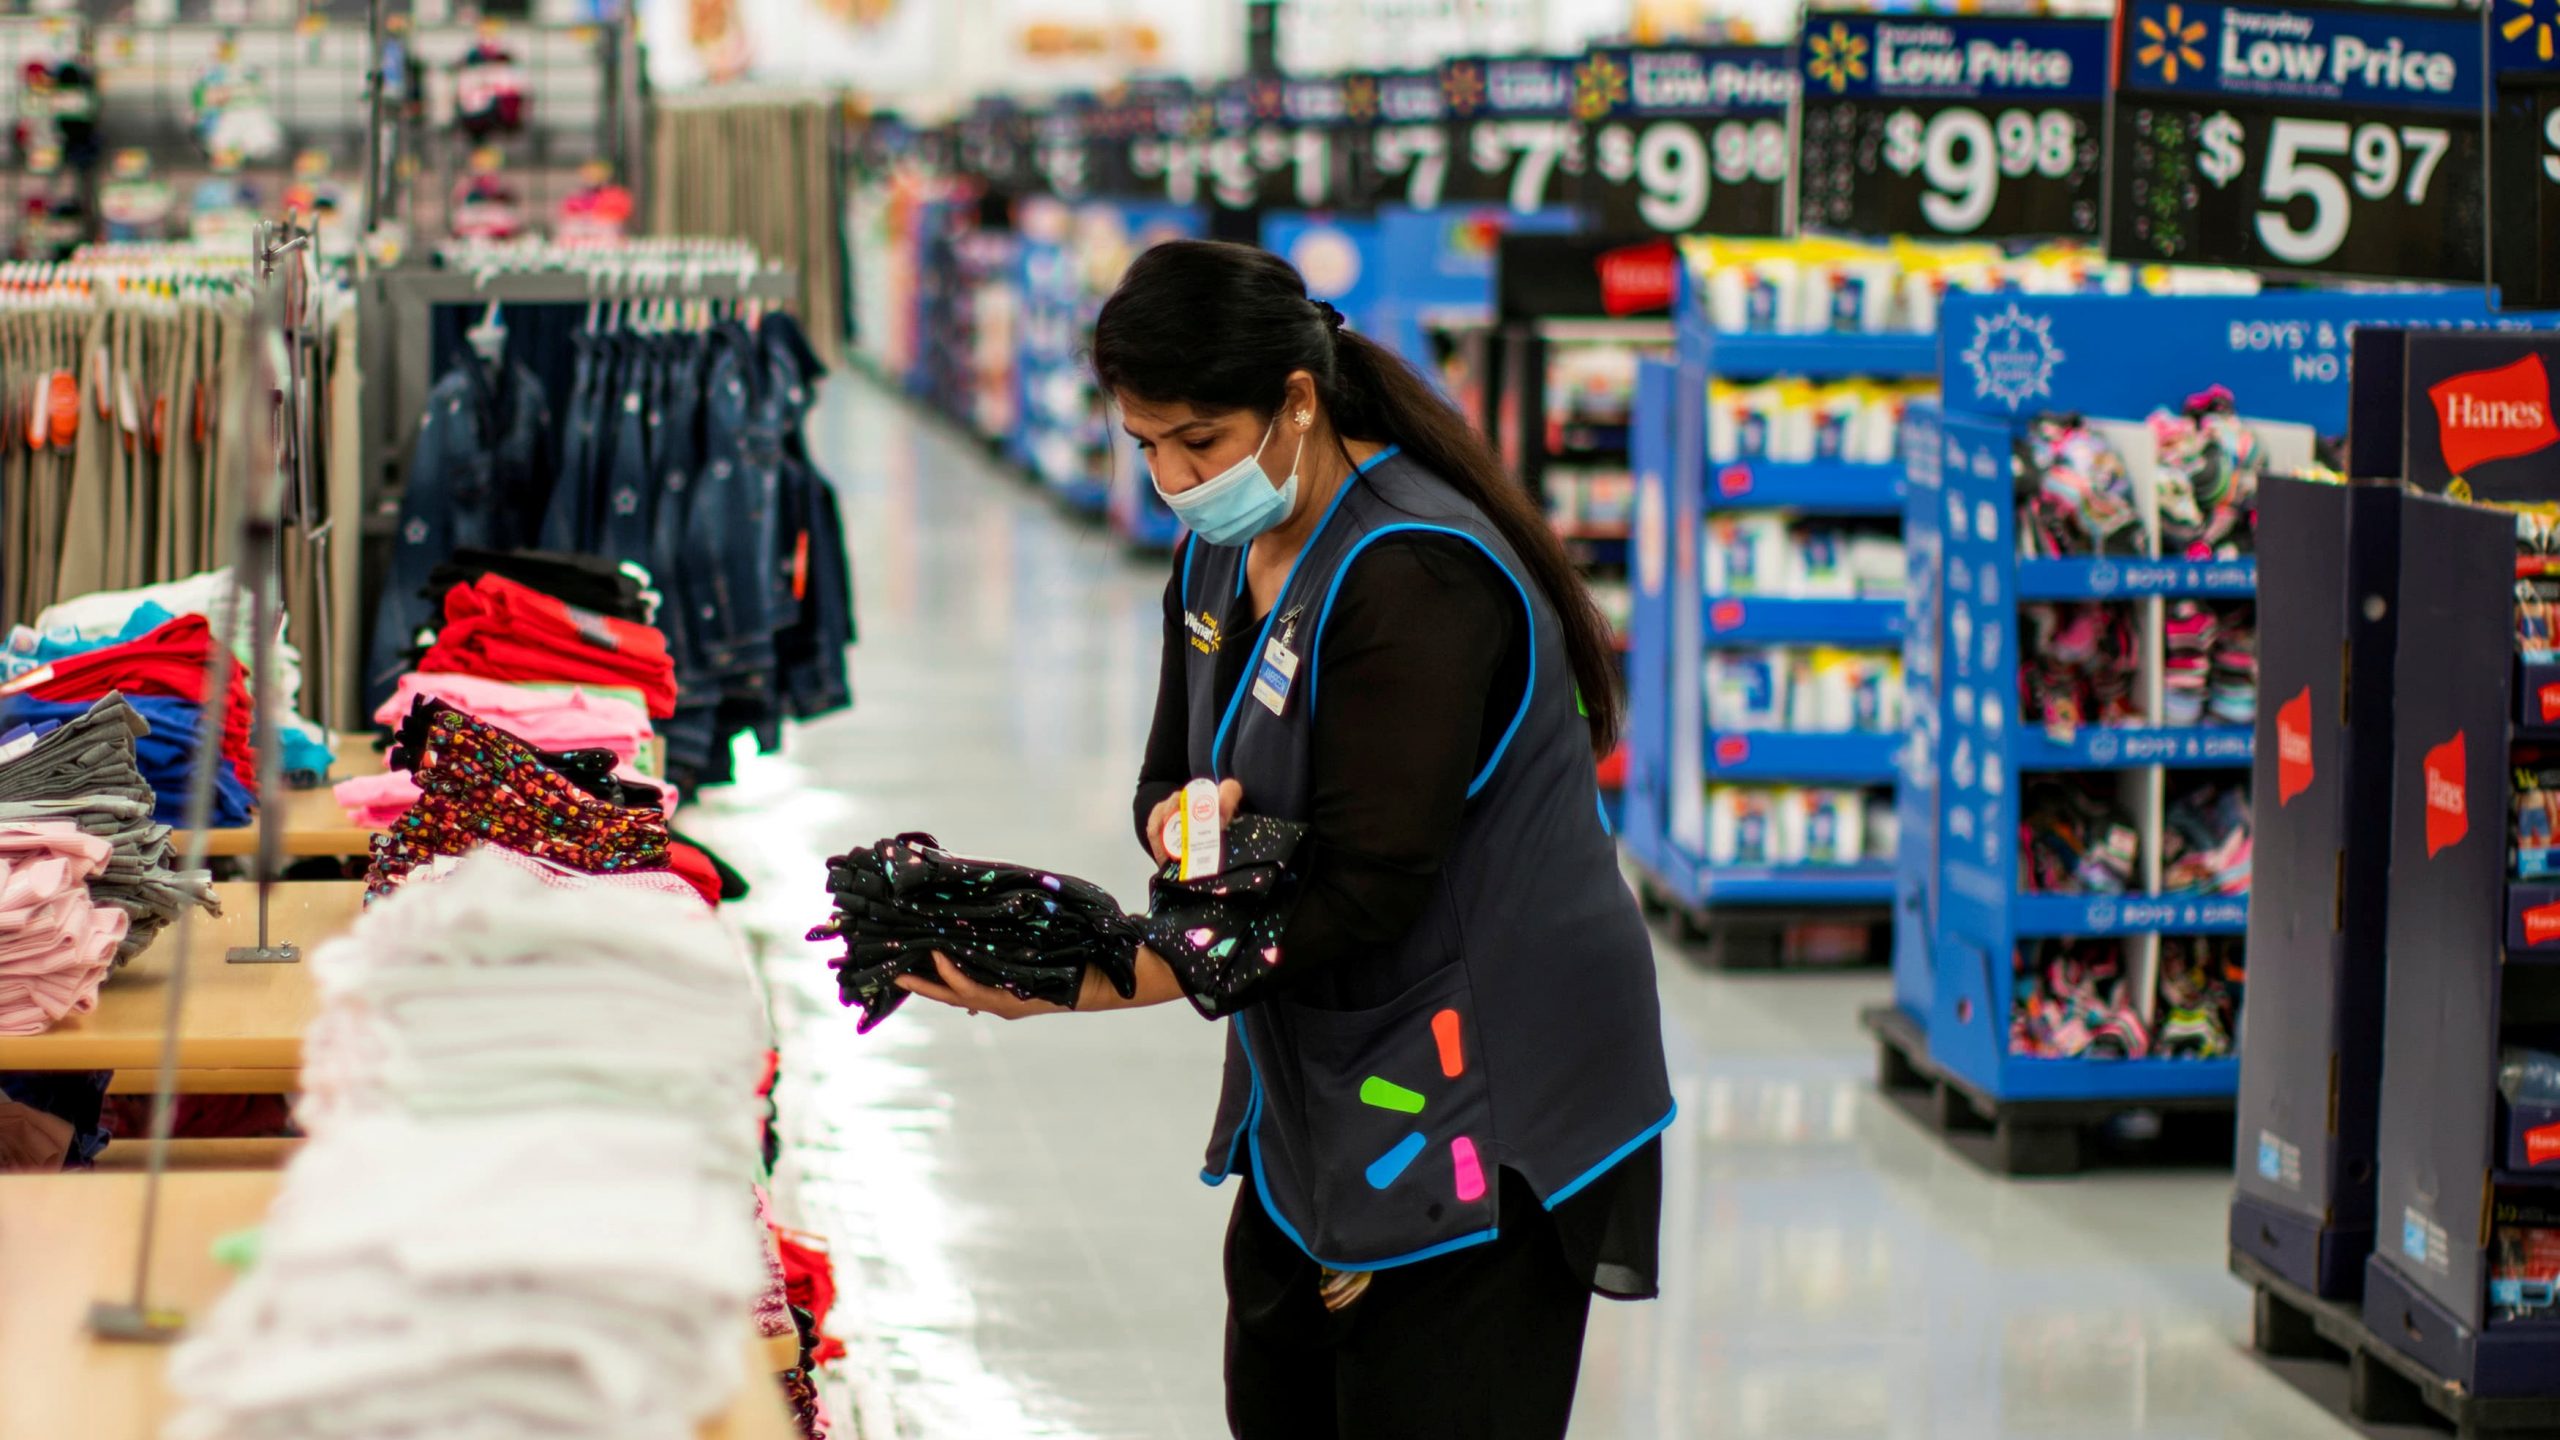 Walmart to hike wages for 425,000 staff to common above $15 an hour